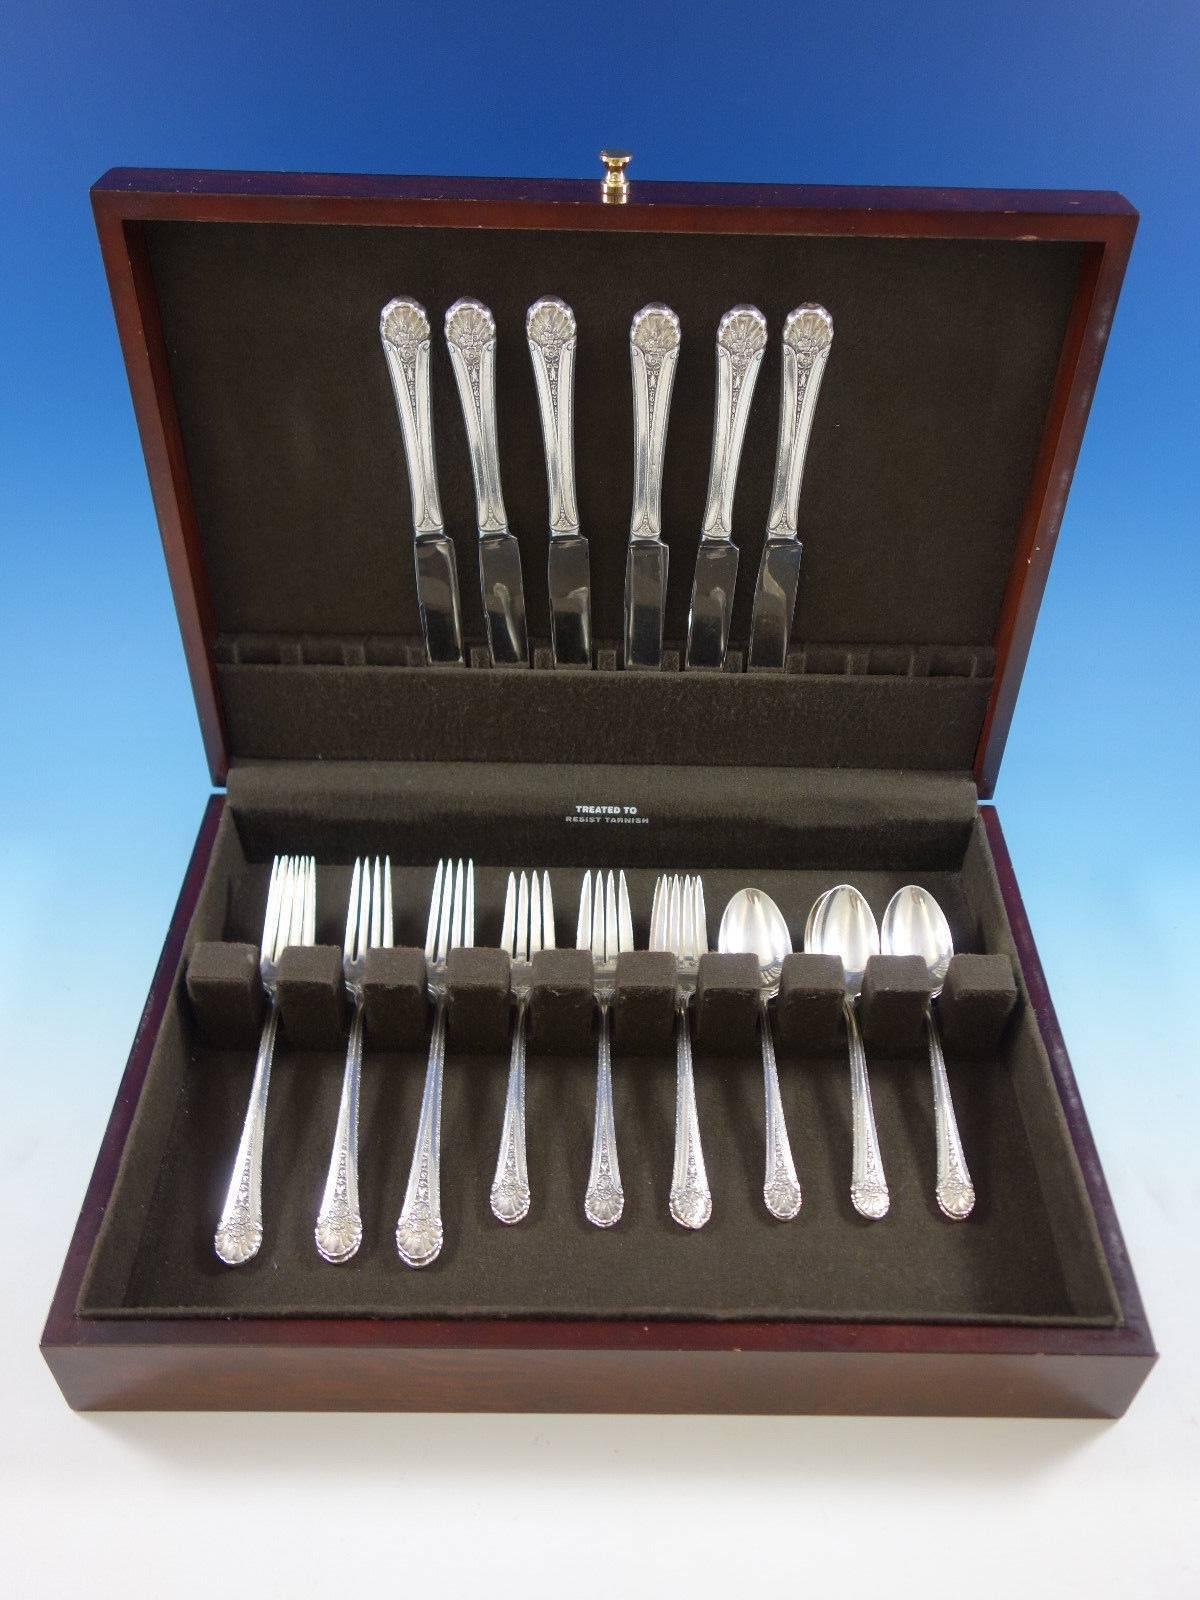 Royal Windsor by Towle sterling silver flatware set - 24 pieces. Great starter set! This set includes: 

six knives, 8 3/4